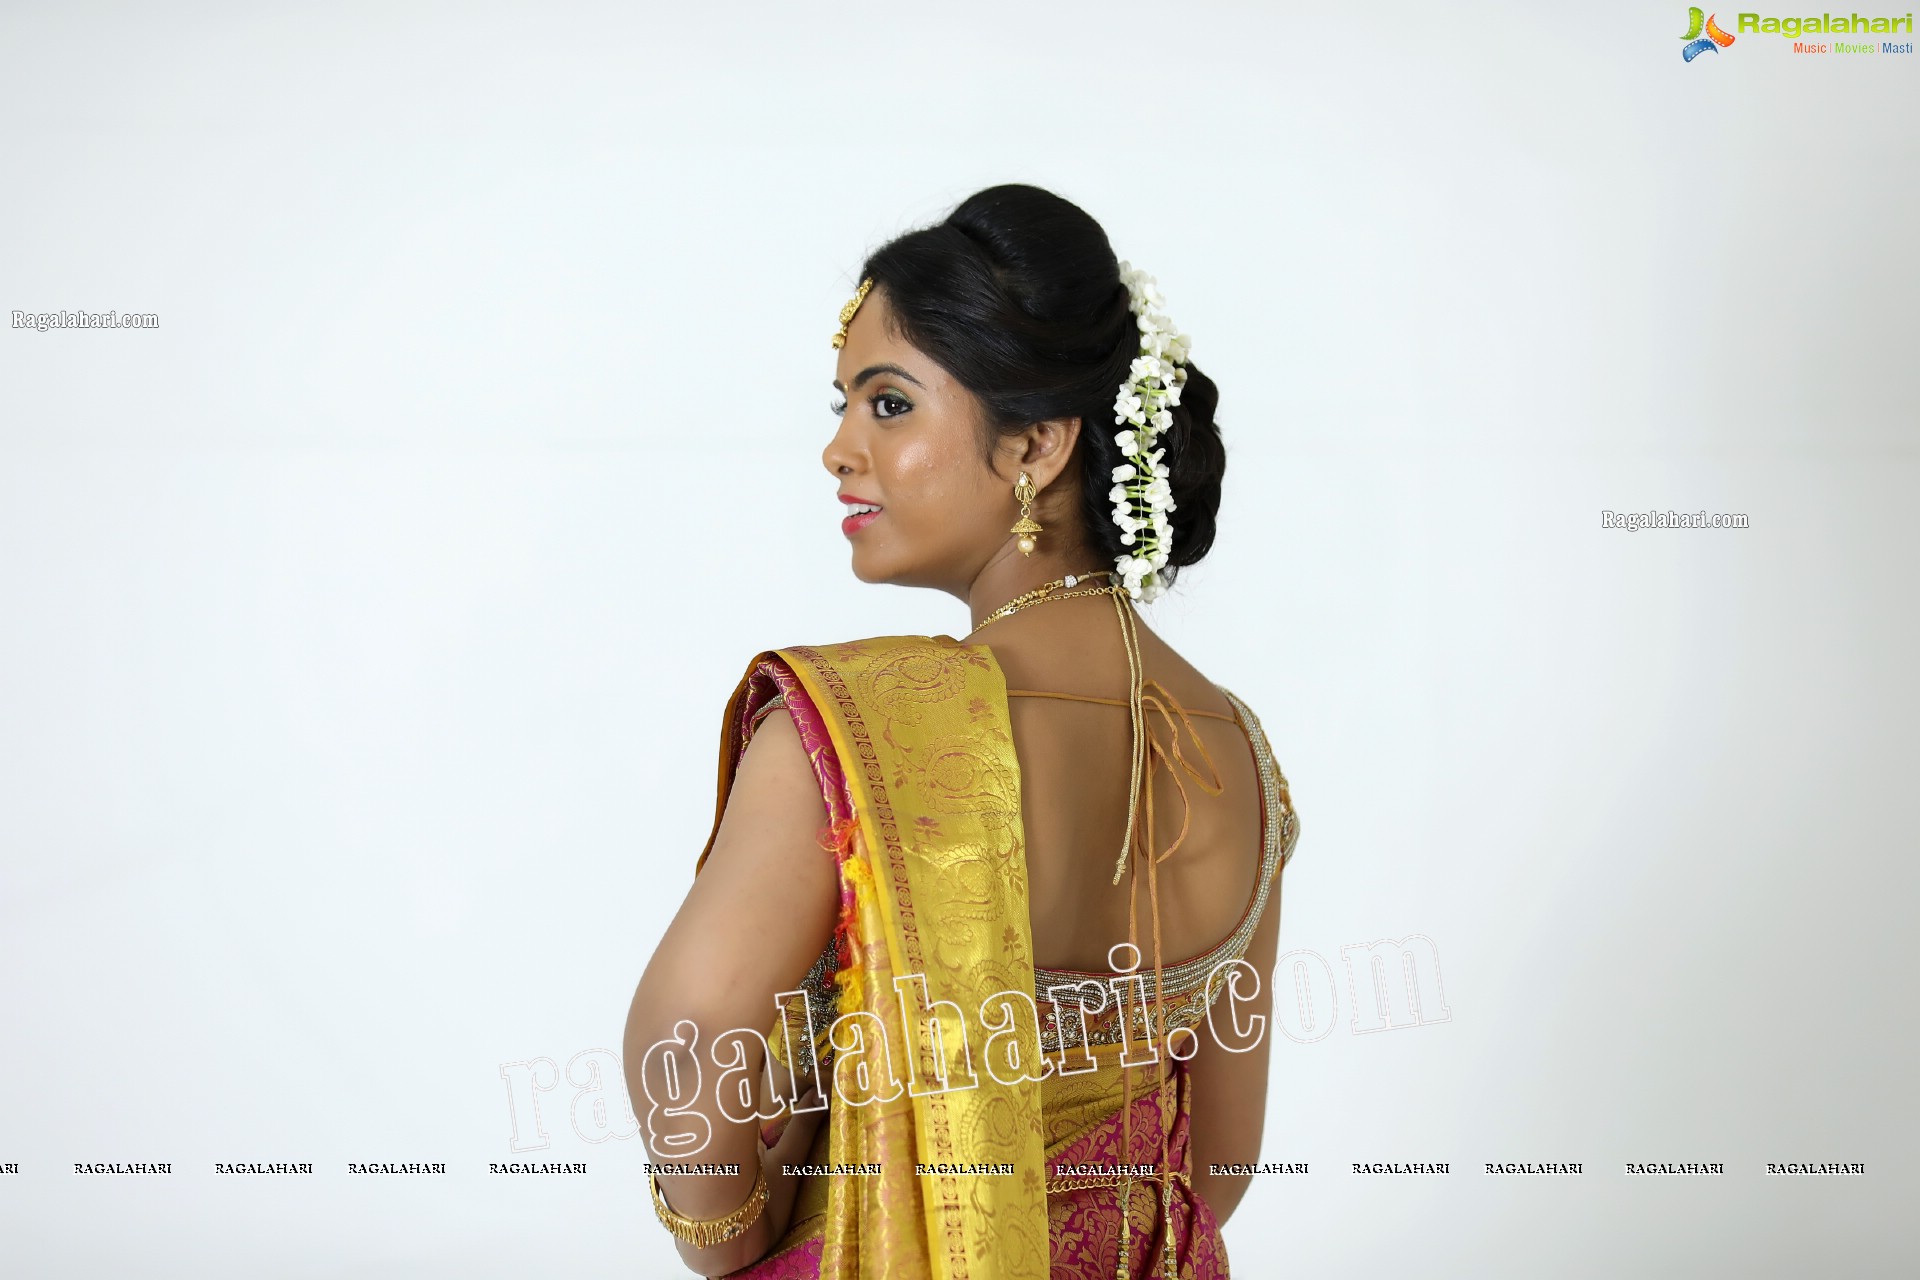 Sameera Reddy G in Pink and Gold Silk Saree With Jewellery Exclusive Photo Shoot